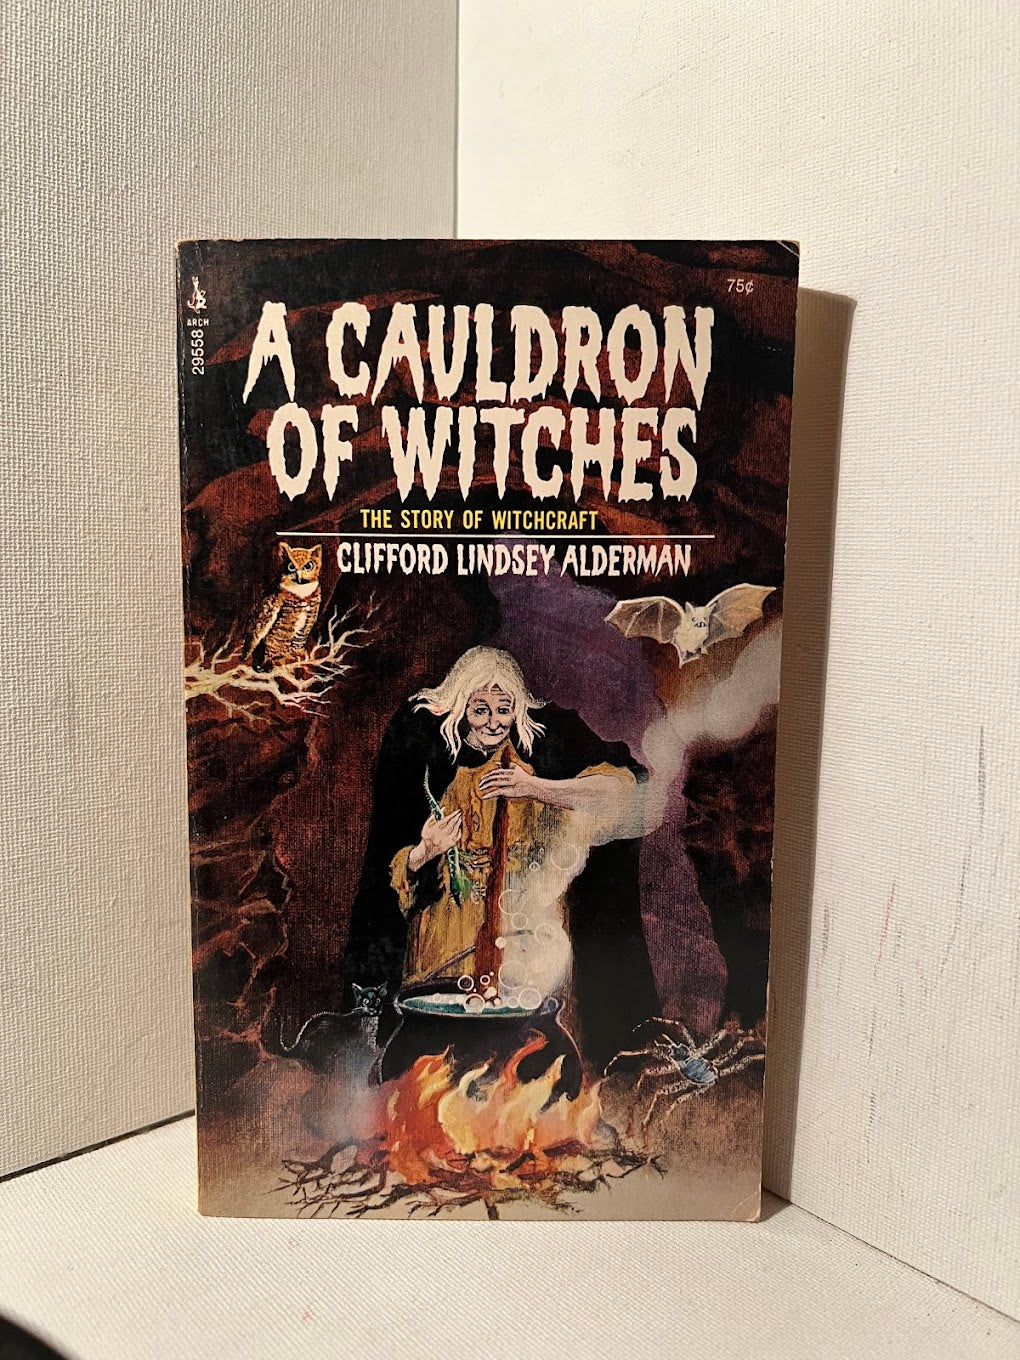 A Cauldron of Witches: The Story of Witchcraft by Clifford Lindsey Alderman